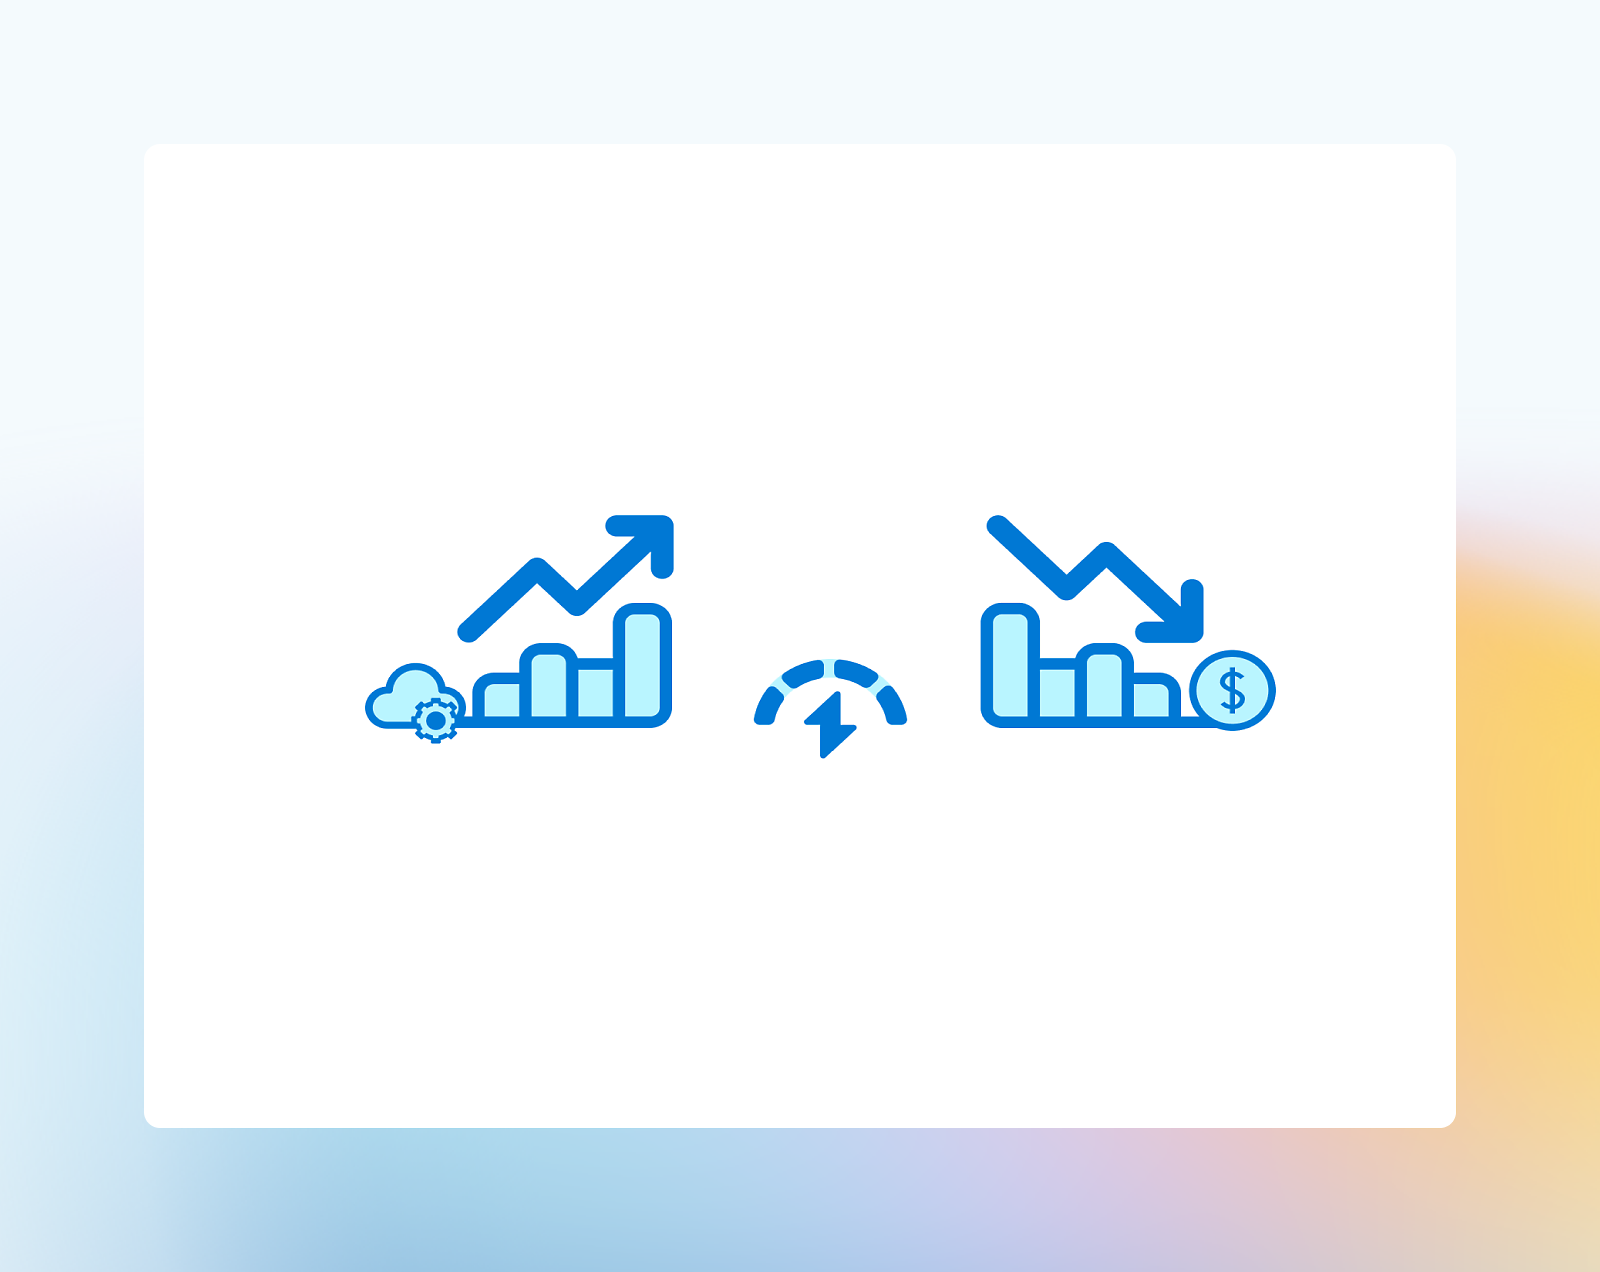 Two icons illustrating business trends: the first shows a rising graph with gears, symbolizing growth